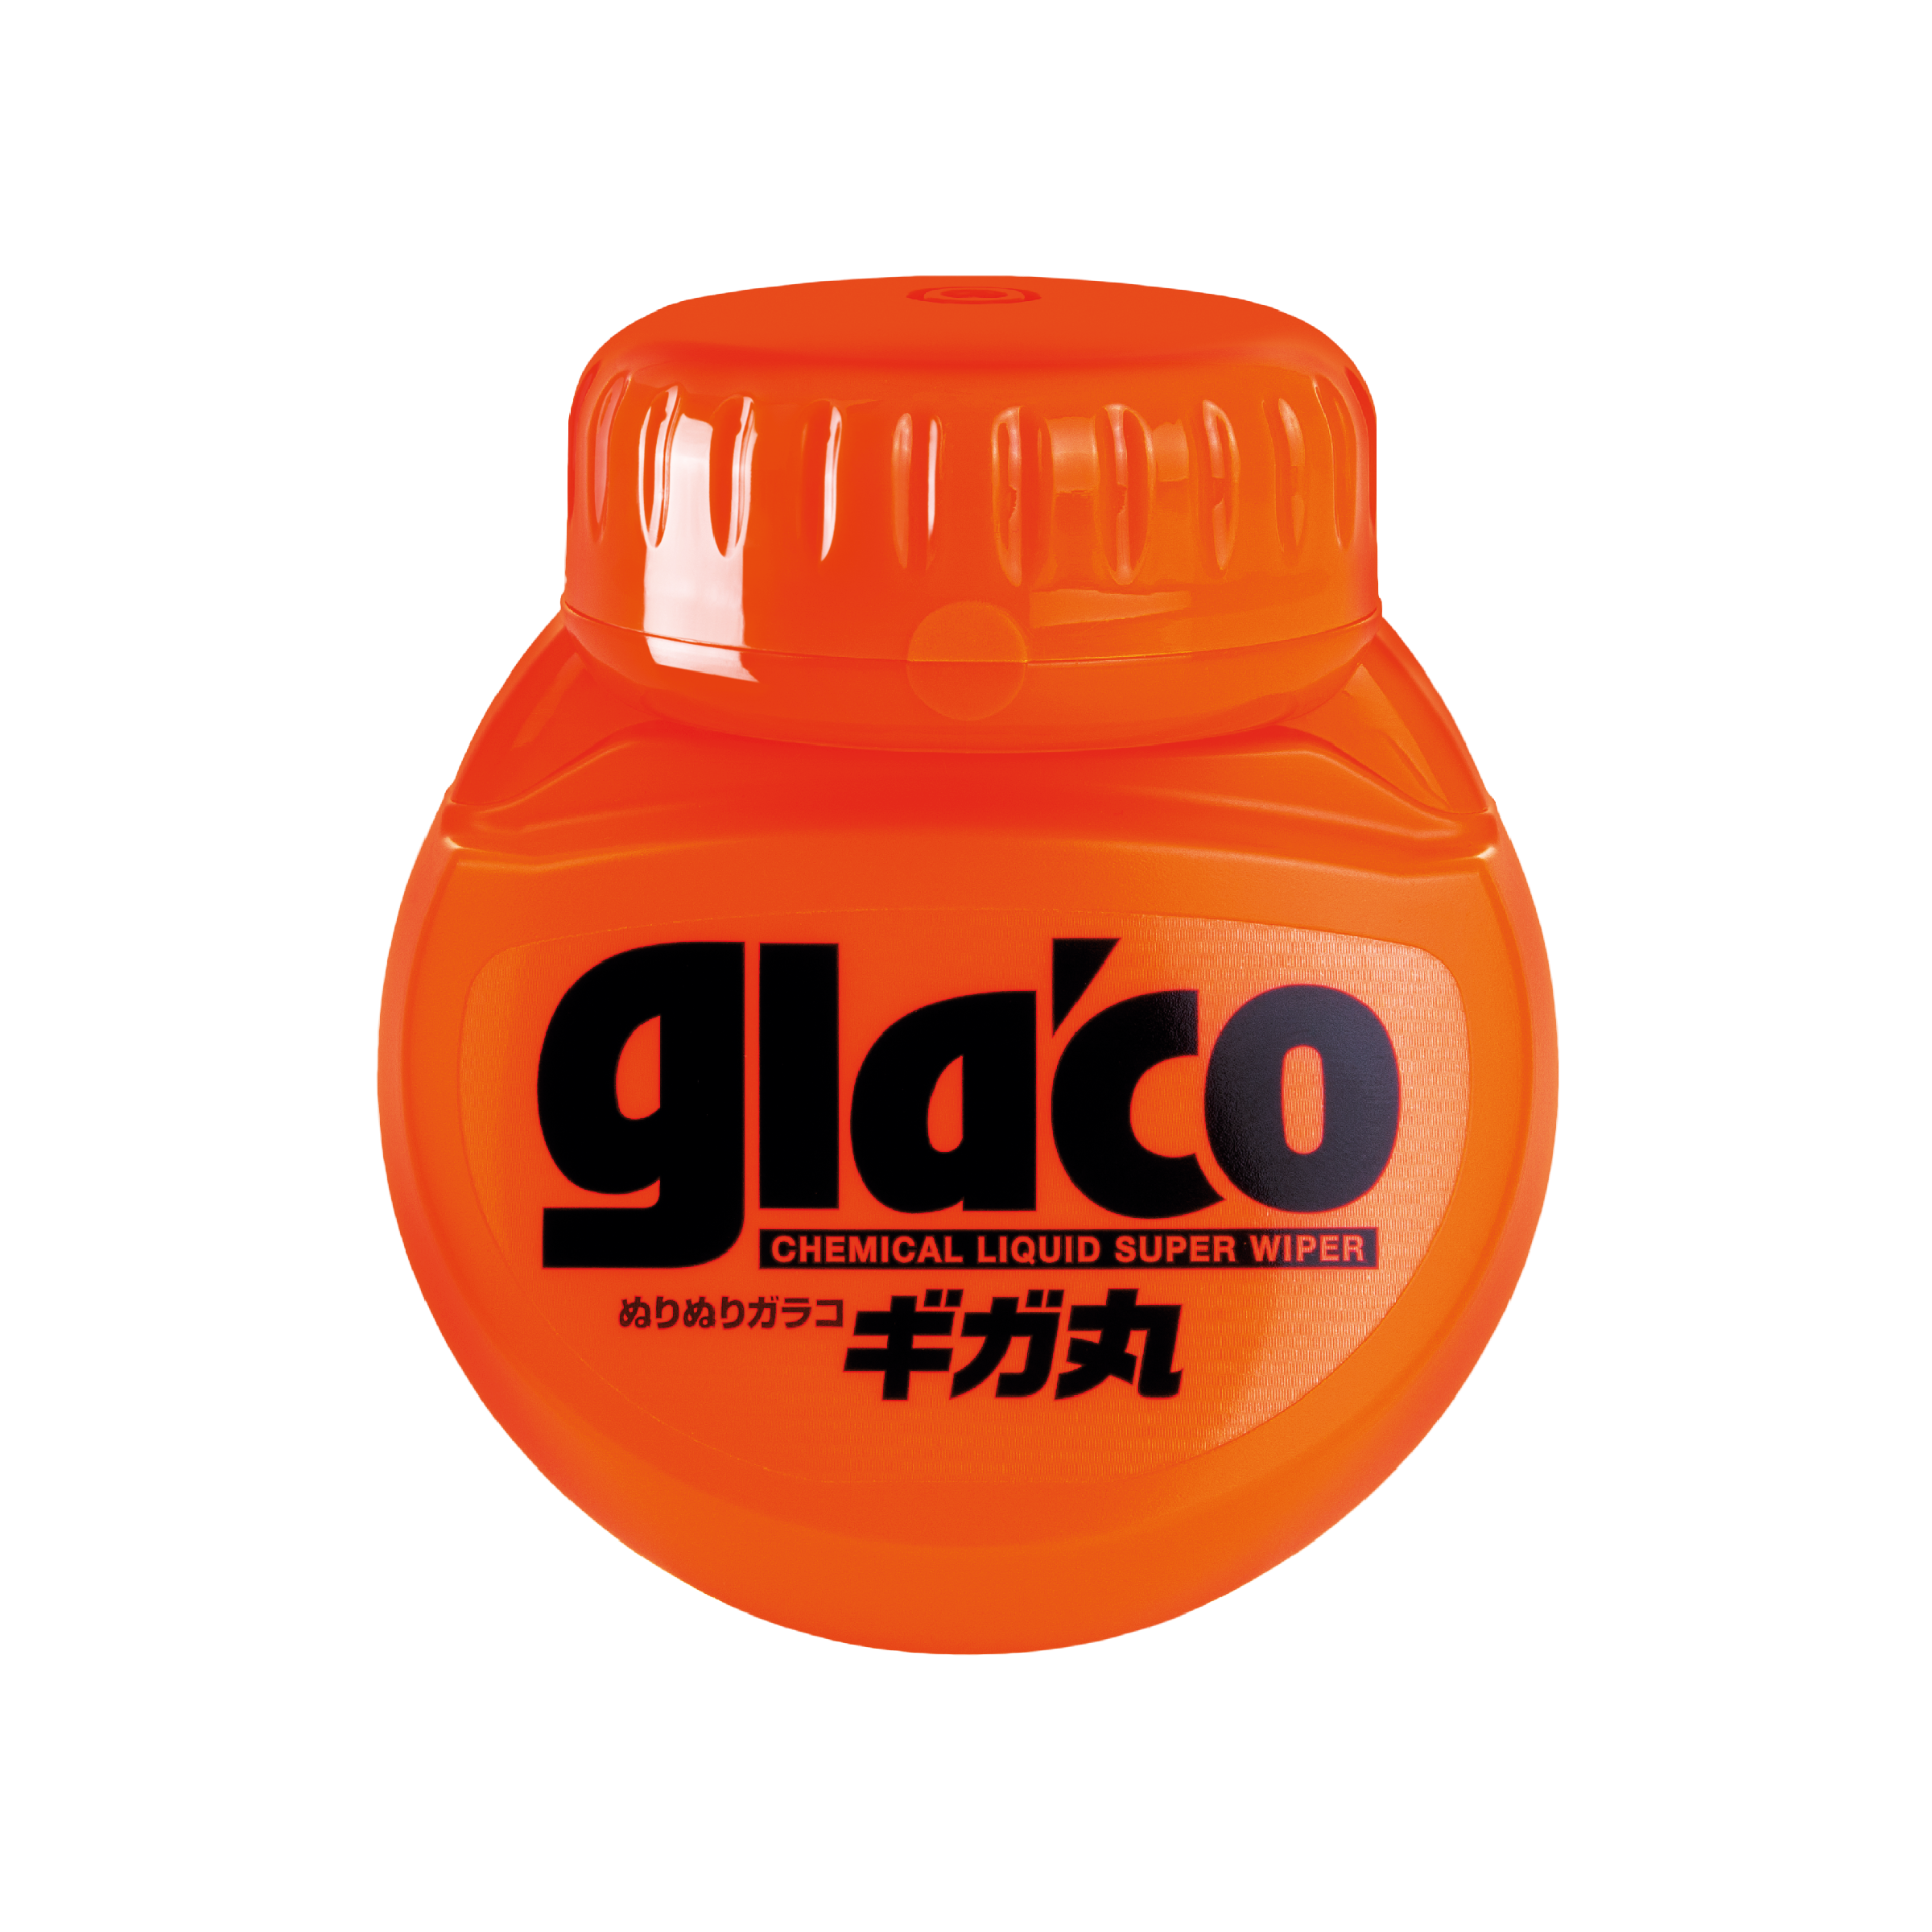 Soft99 Glaco Glass Compound and Glaco review: Liquid windscreen wipers